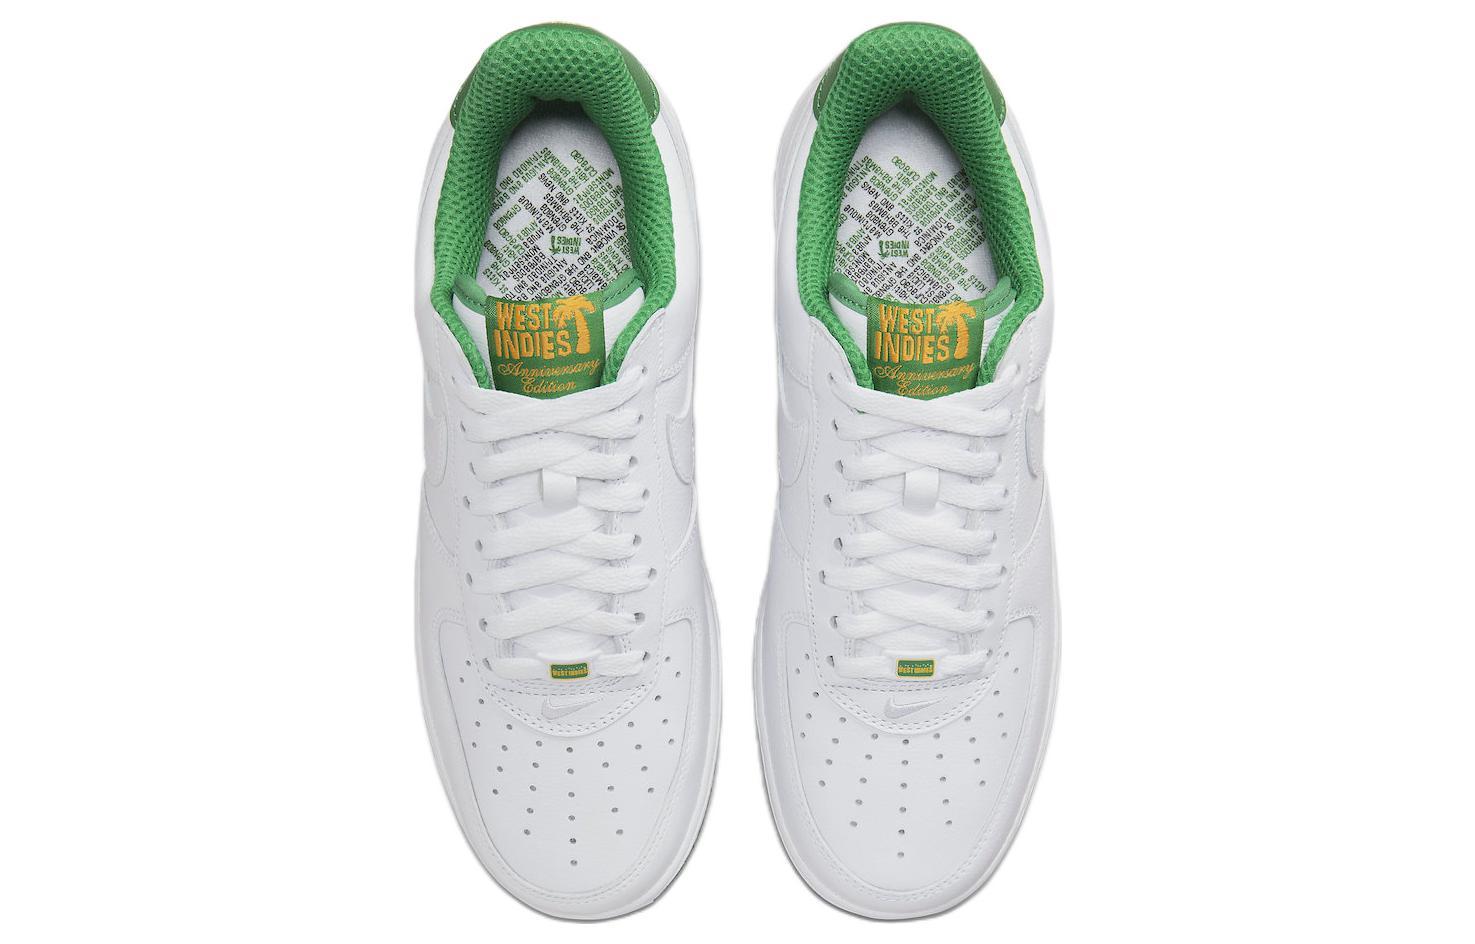 Nike Air Force 1 Low Retro QS "West Indies"